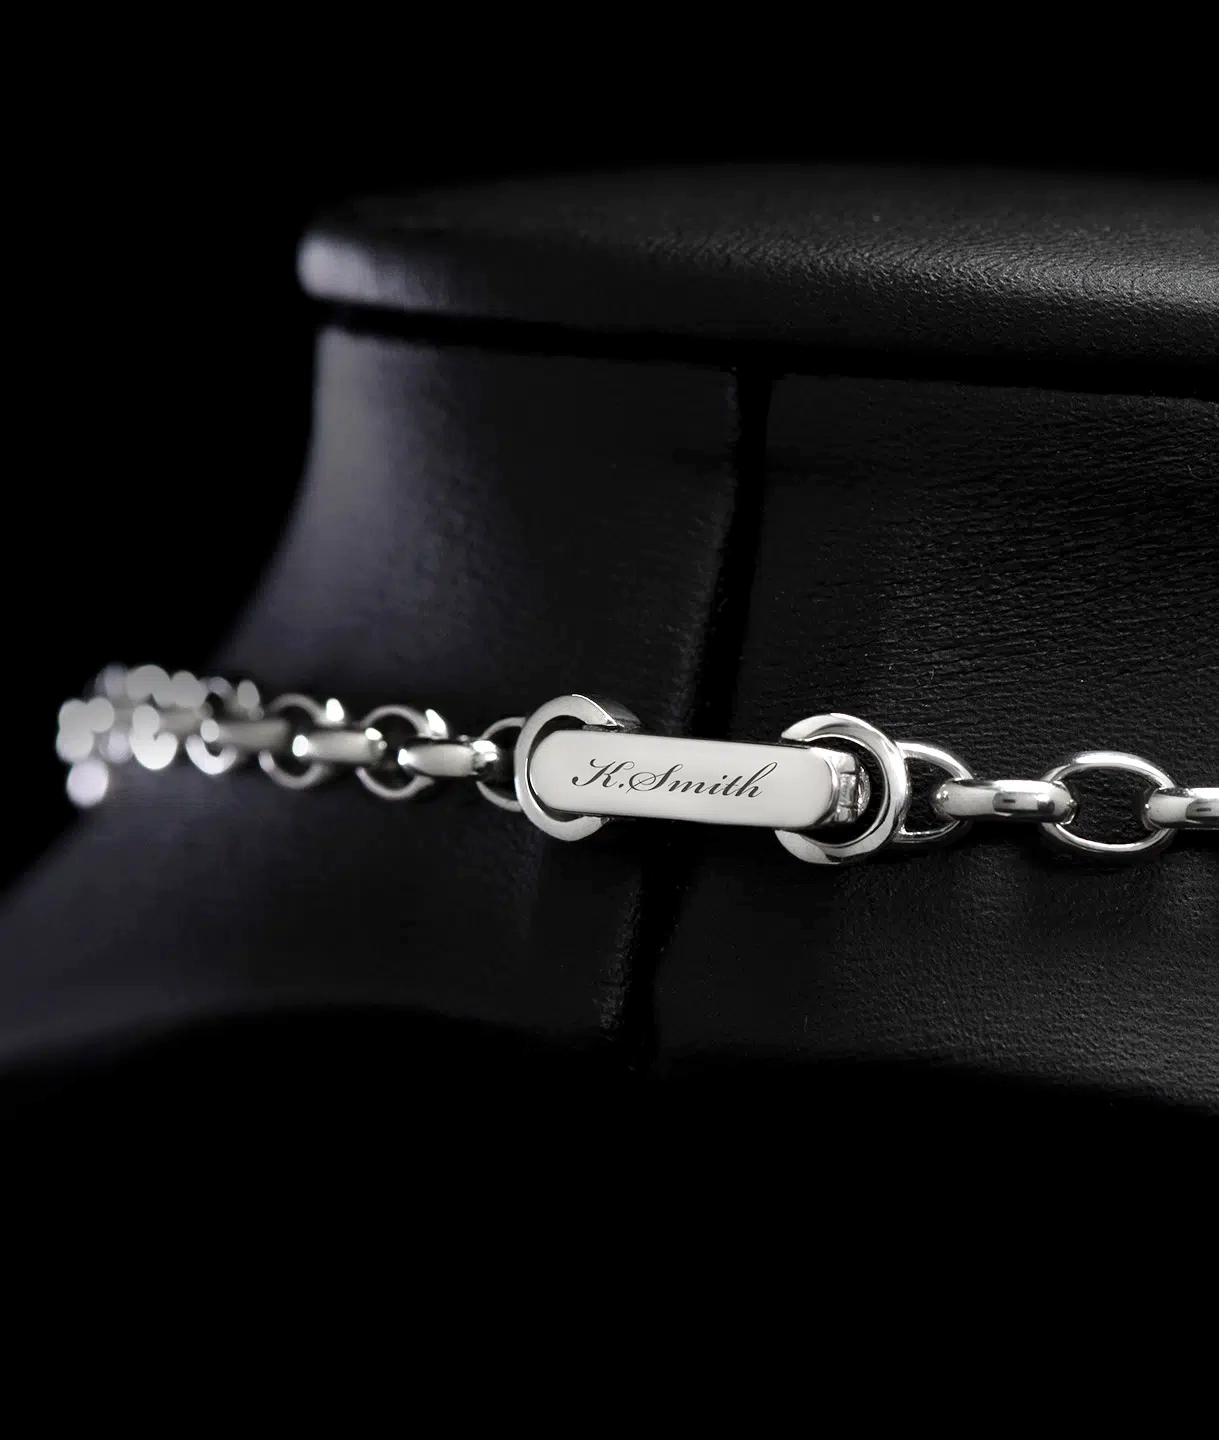 A clasp of a men's platinum rolo link chain necklace designed by ByEnzo Jewelry with engraving on the back of the chain